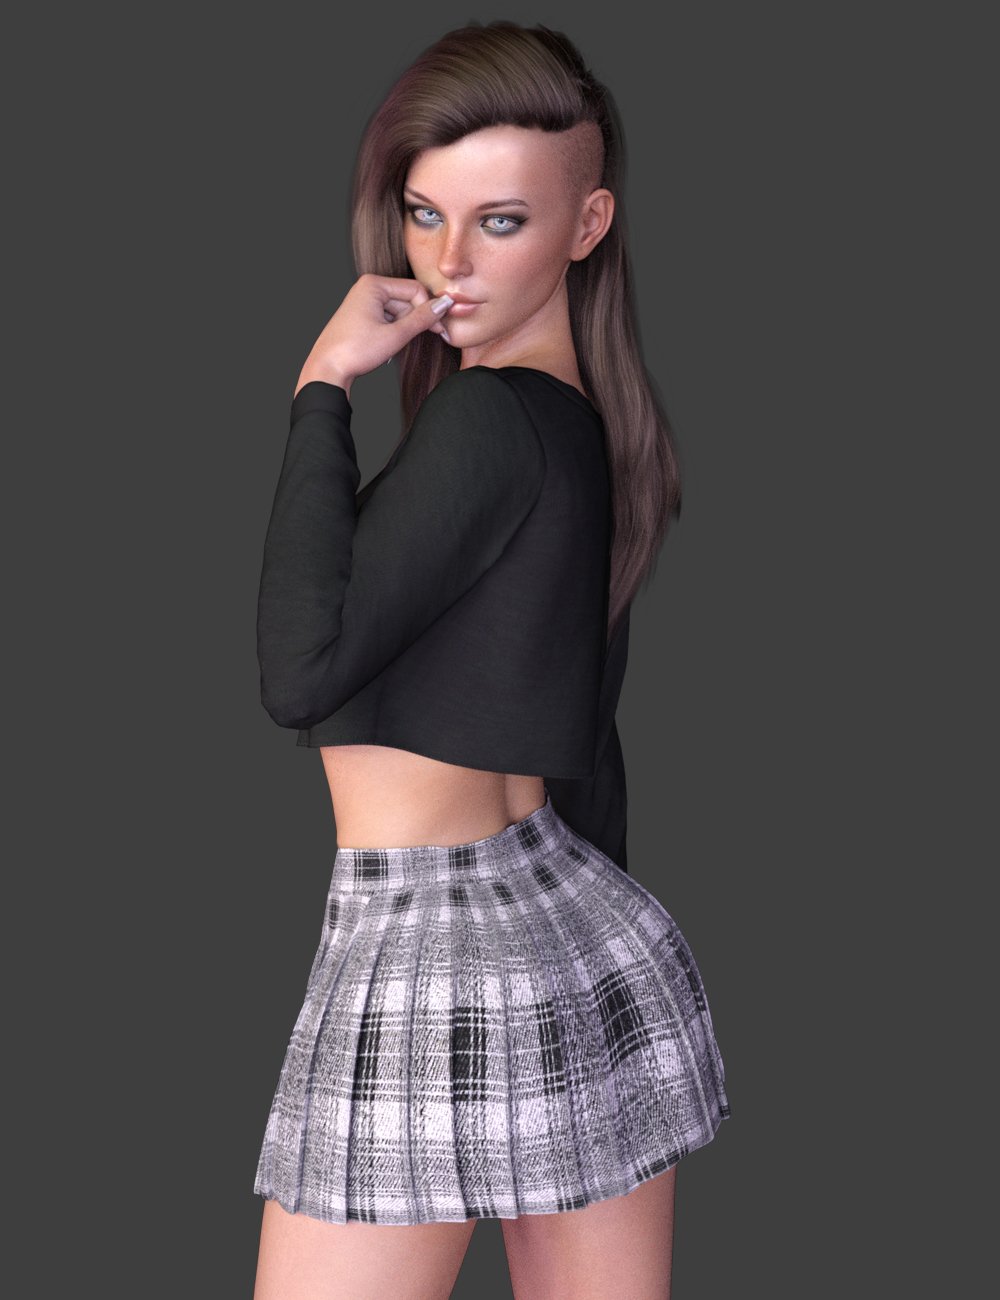 X Fashion Girl Collection For Genesis 8 Females Daz 3d 3487